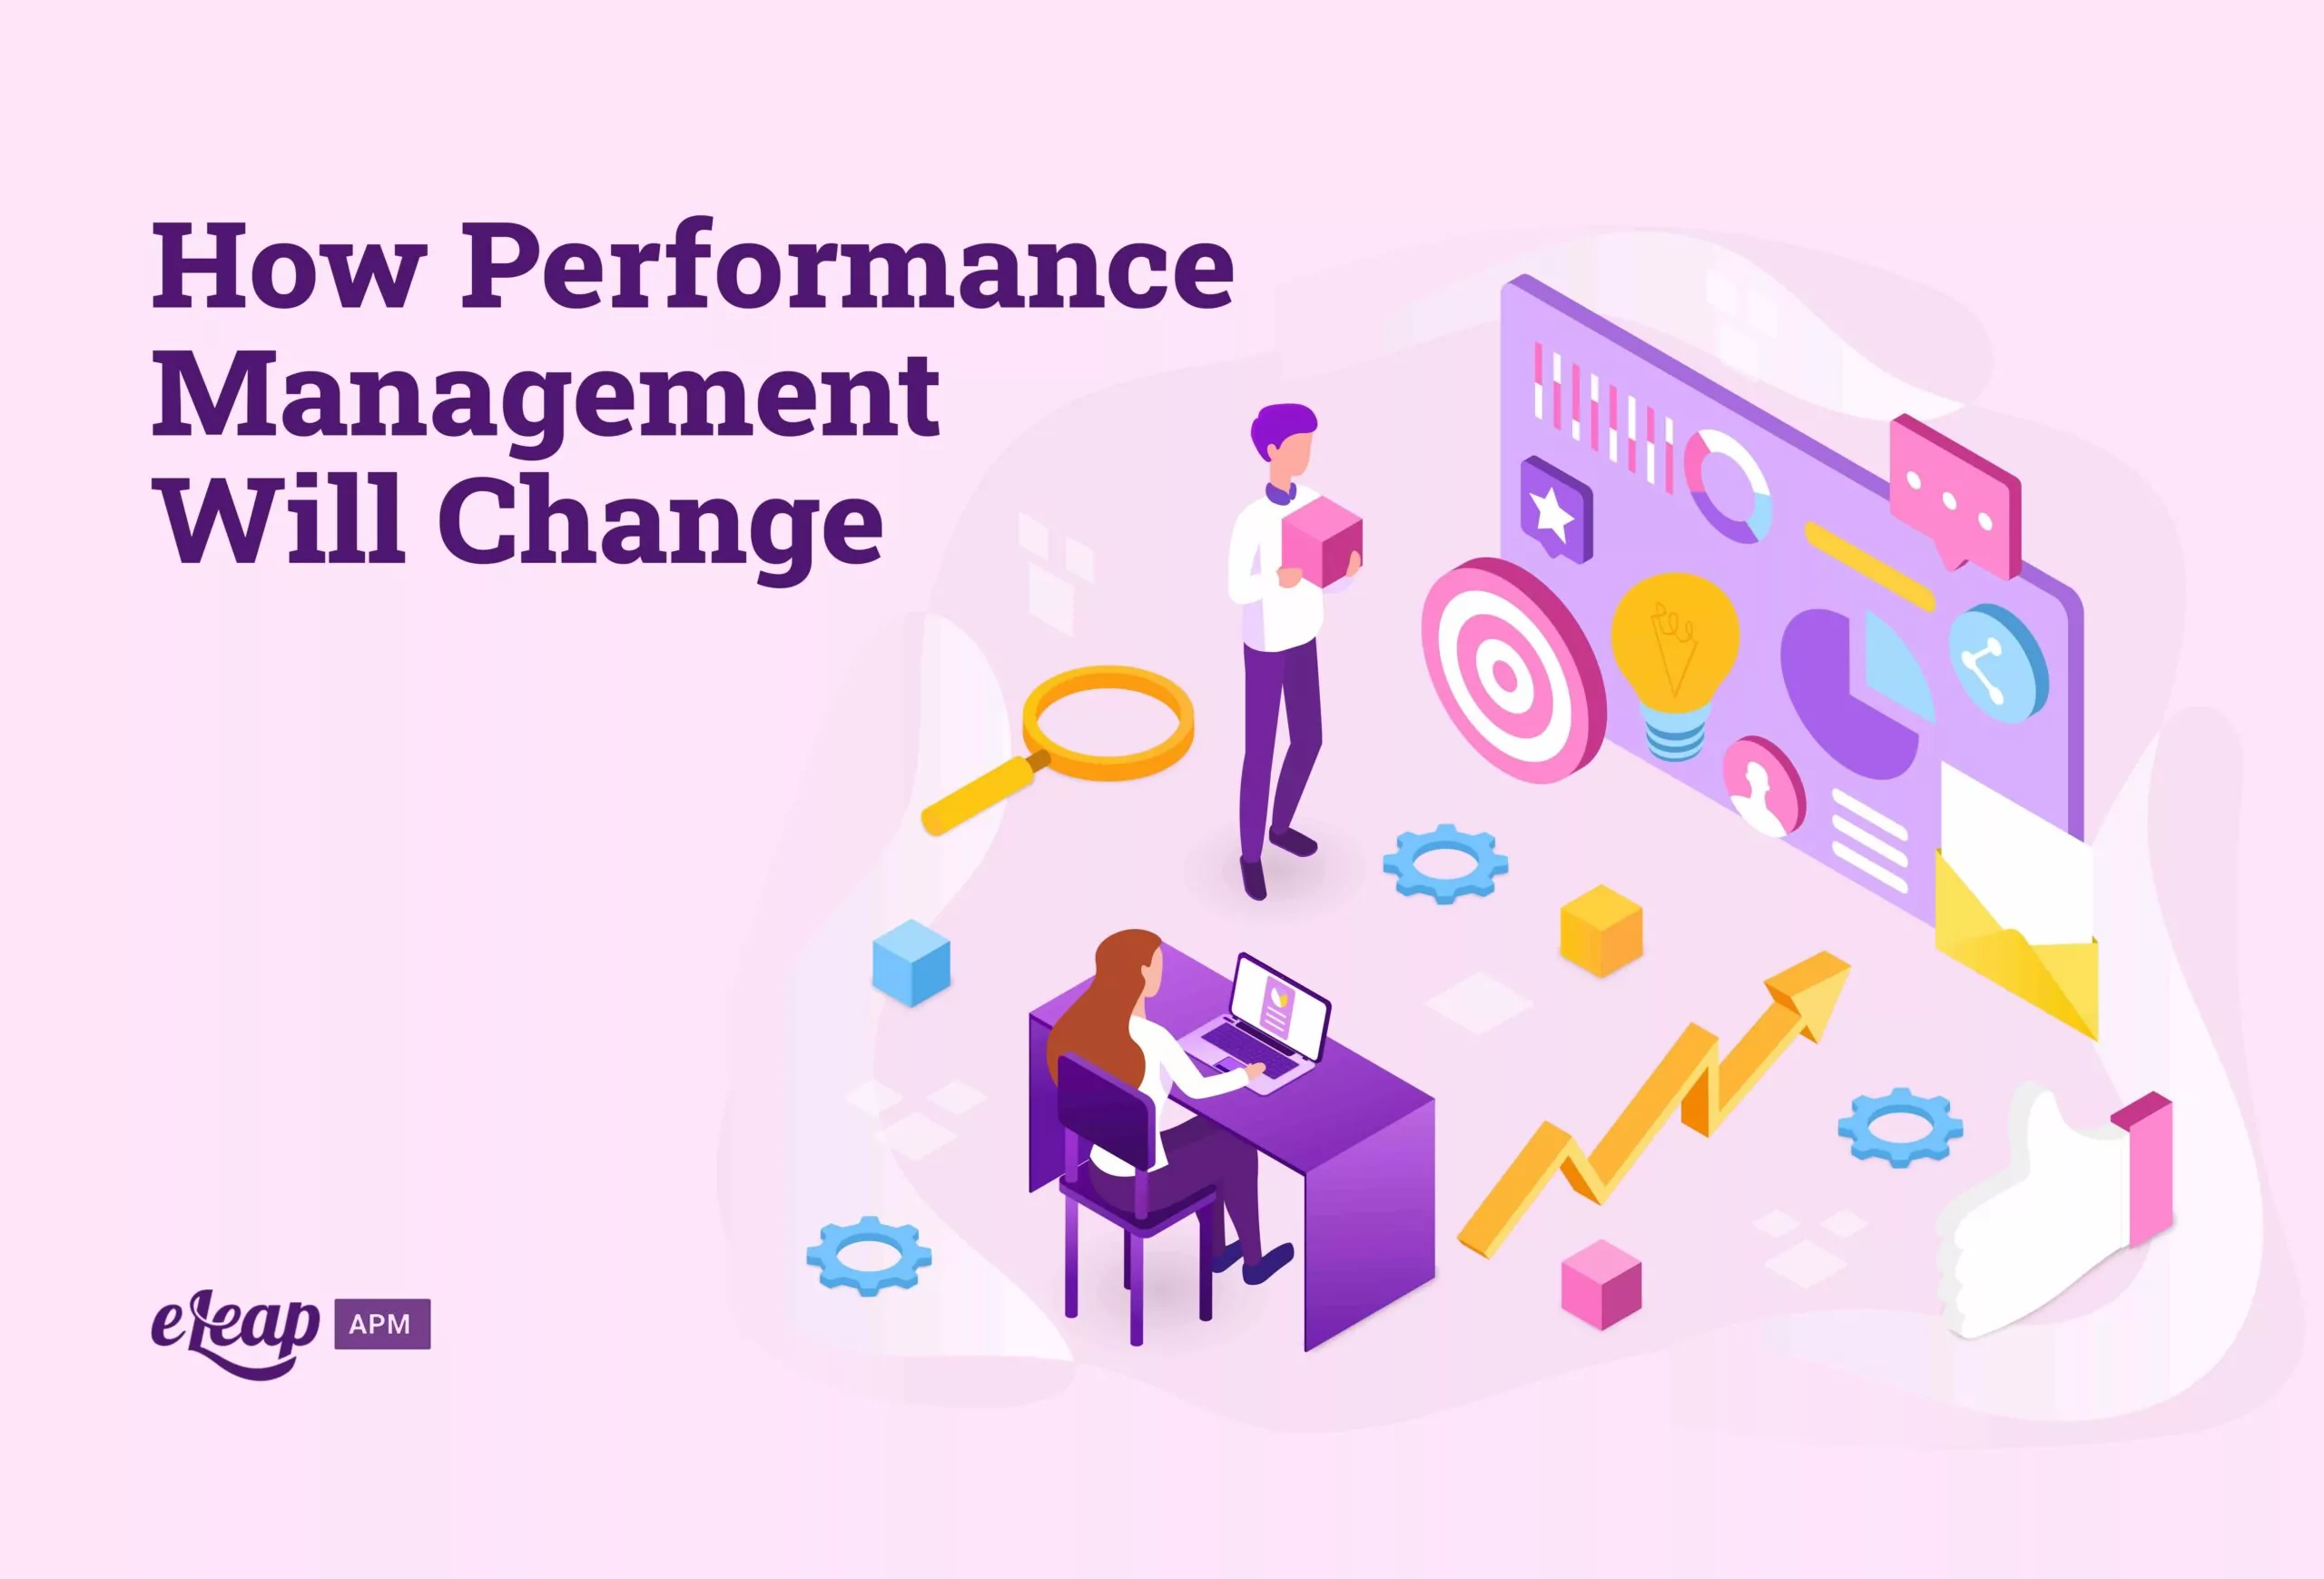 How Performance Management Will Change